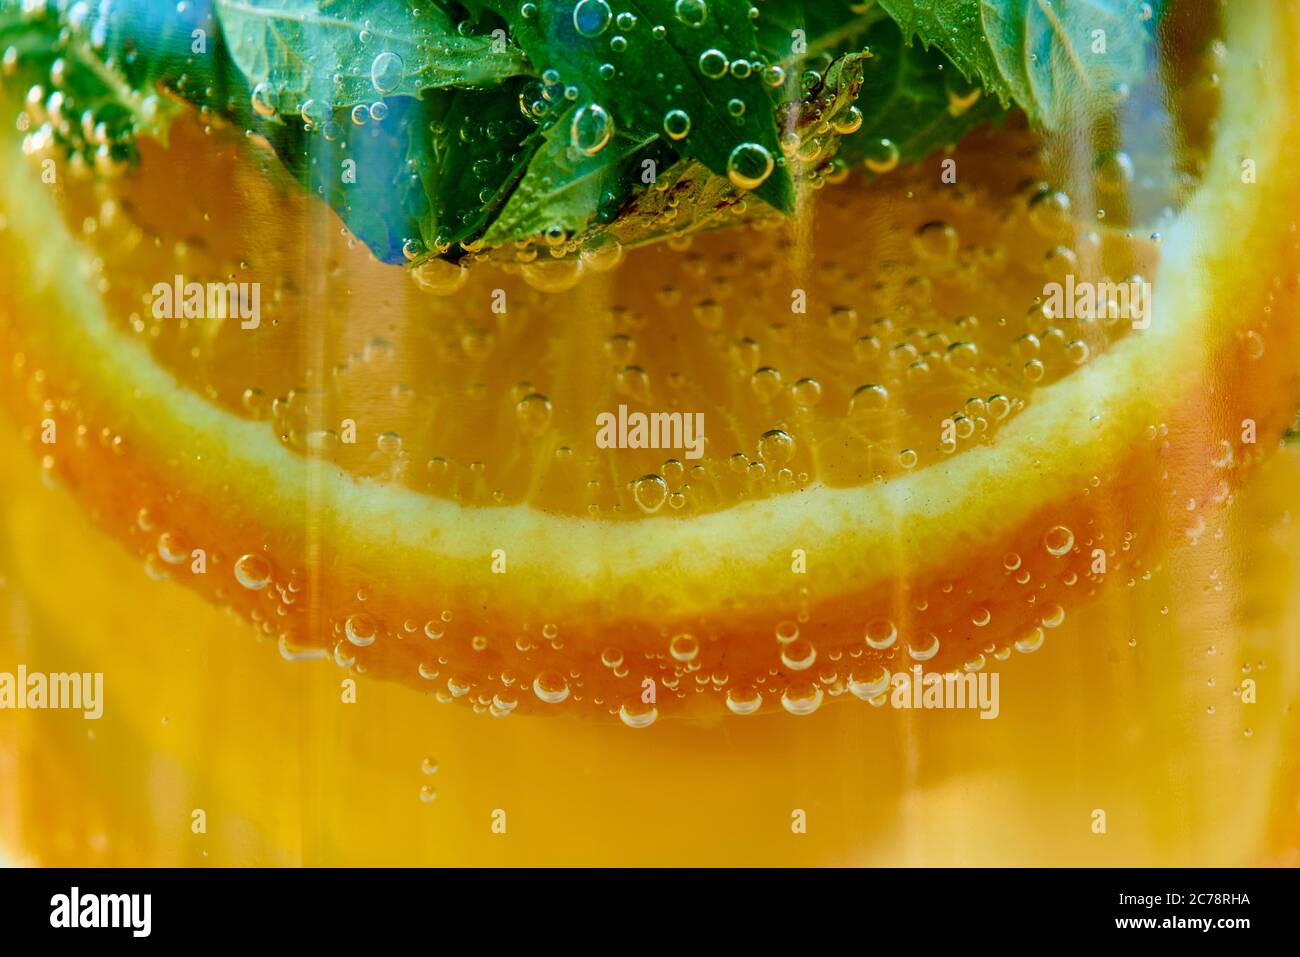 Orange lemonade with mint in a glass as a background. Stock Photo